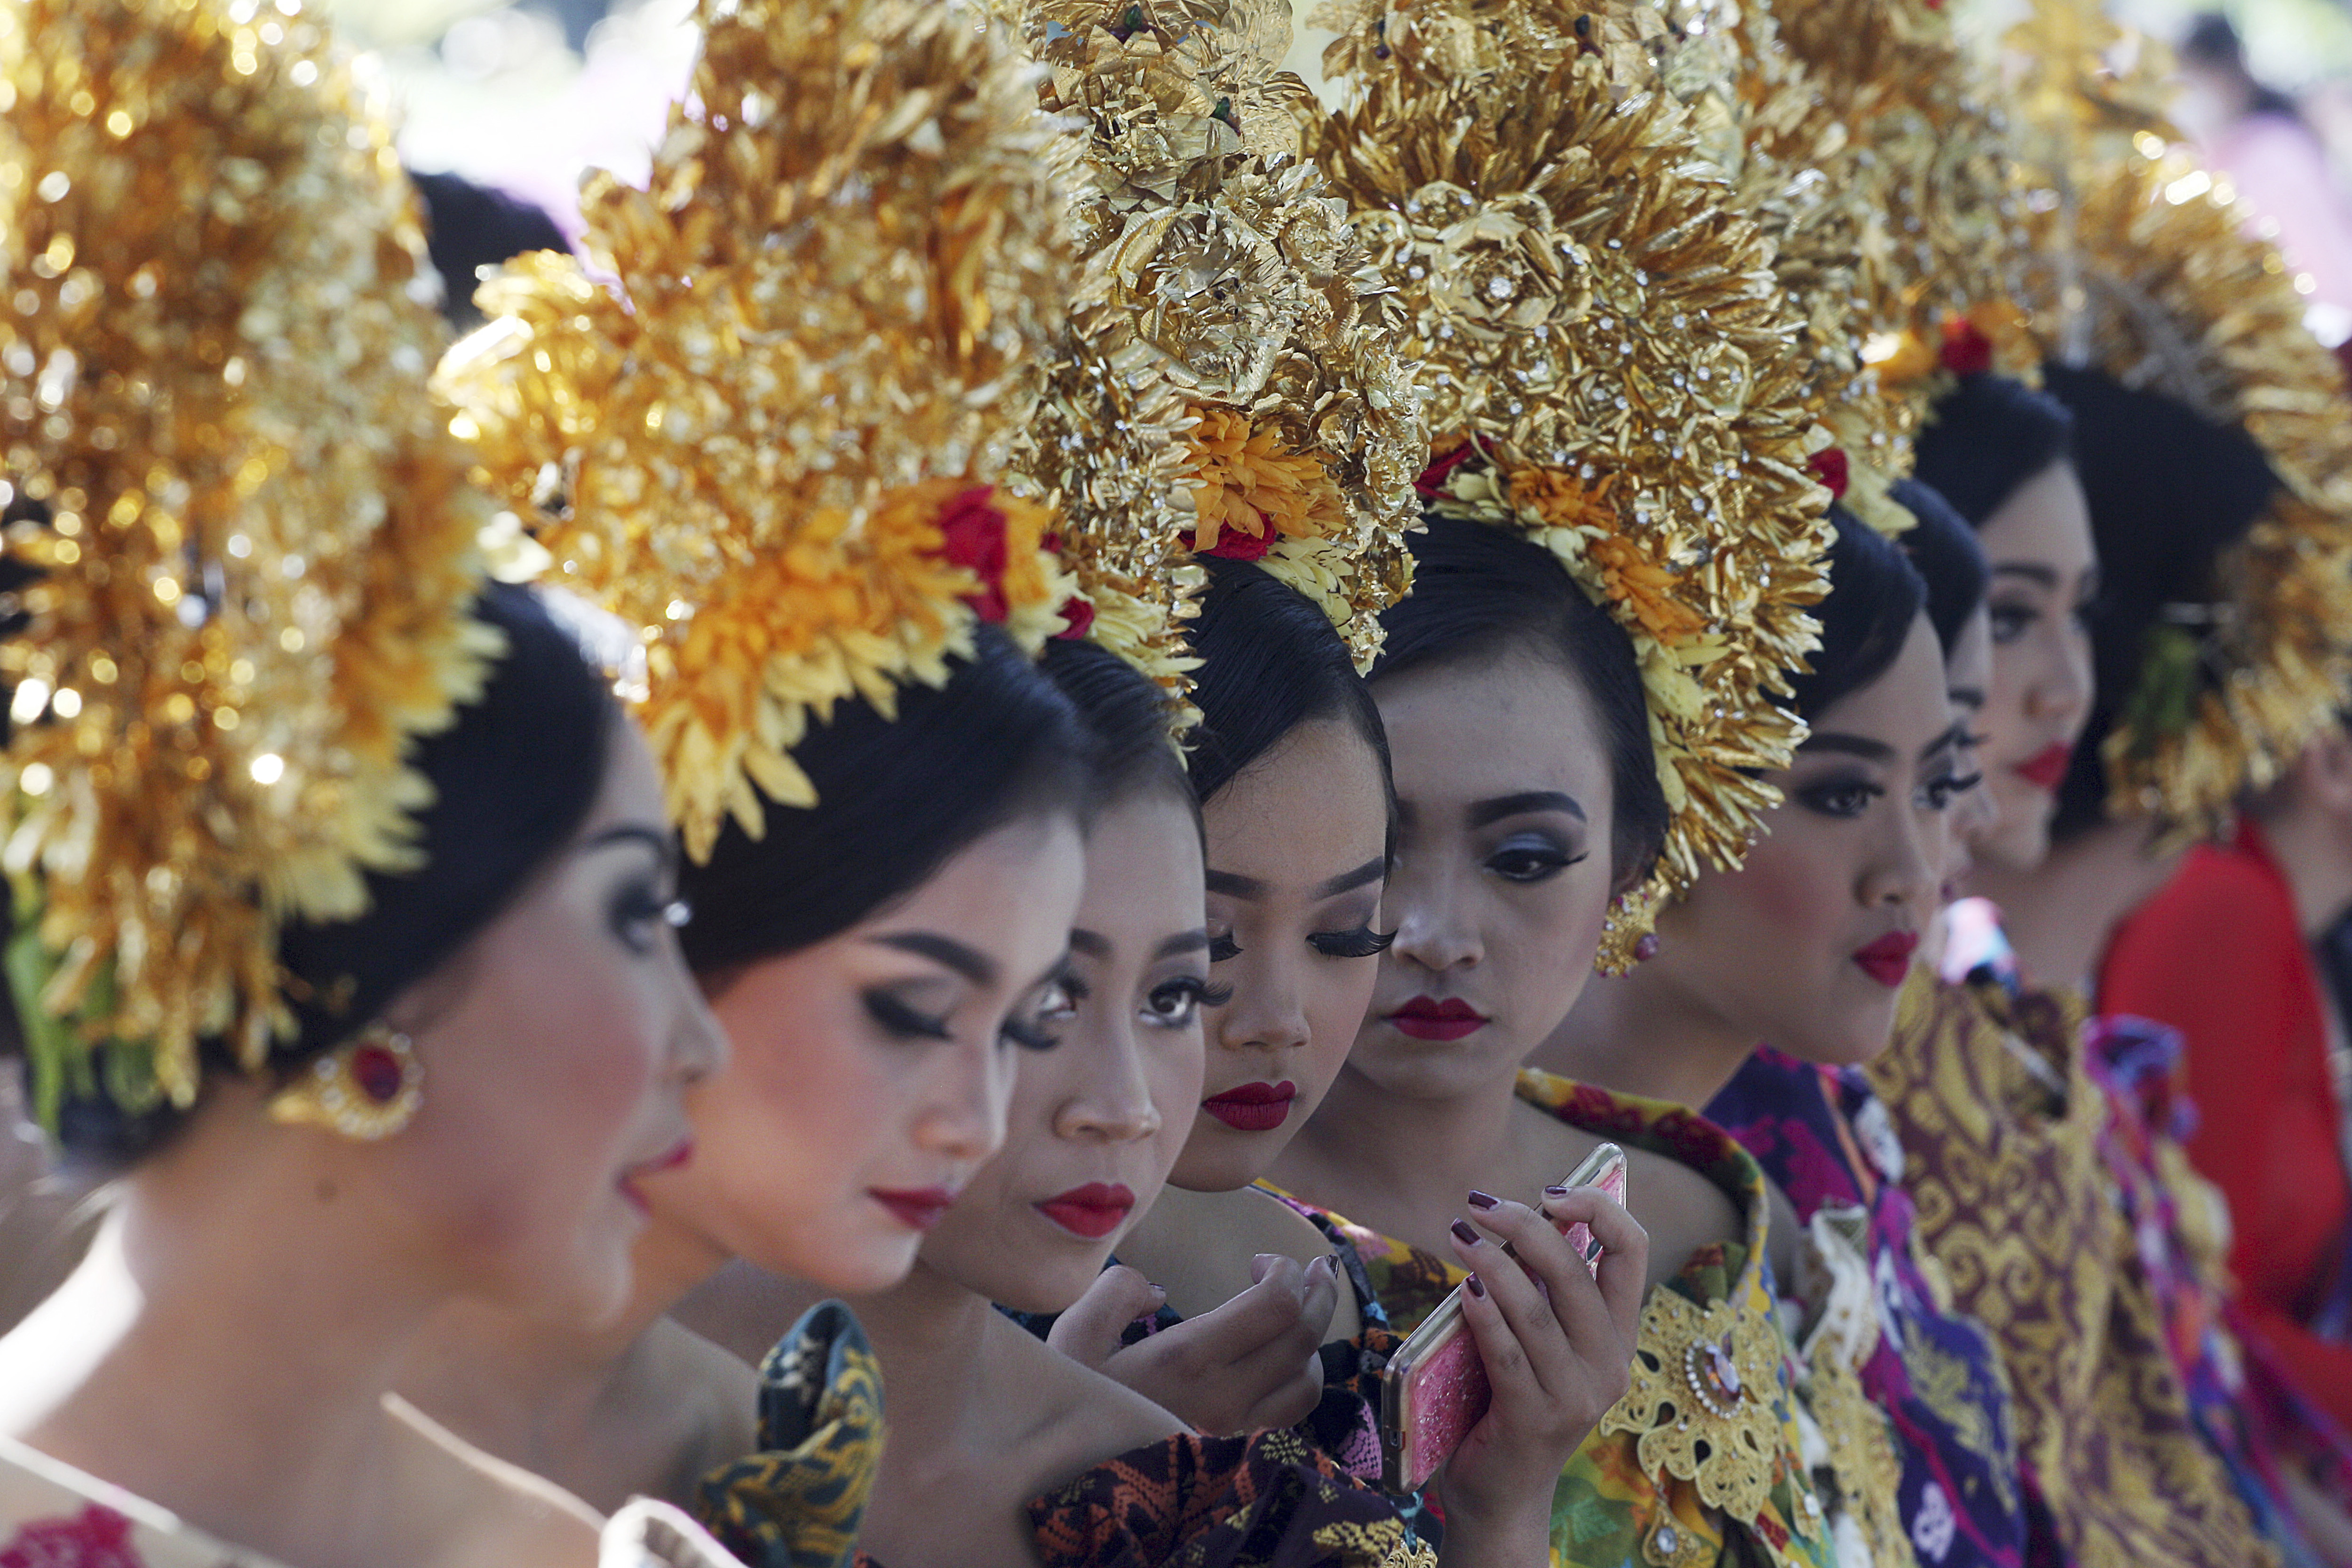 Women in traditional dress wait for a parade during the Bali Arts Festival in Bali, Indonesia, Saturday, June 10, 2017. A month-long annual festival started on Saturday. (AP Photo/Firdia Lisnawati)